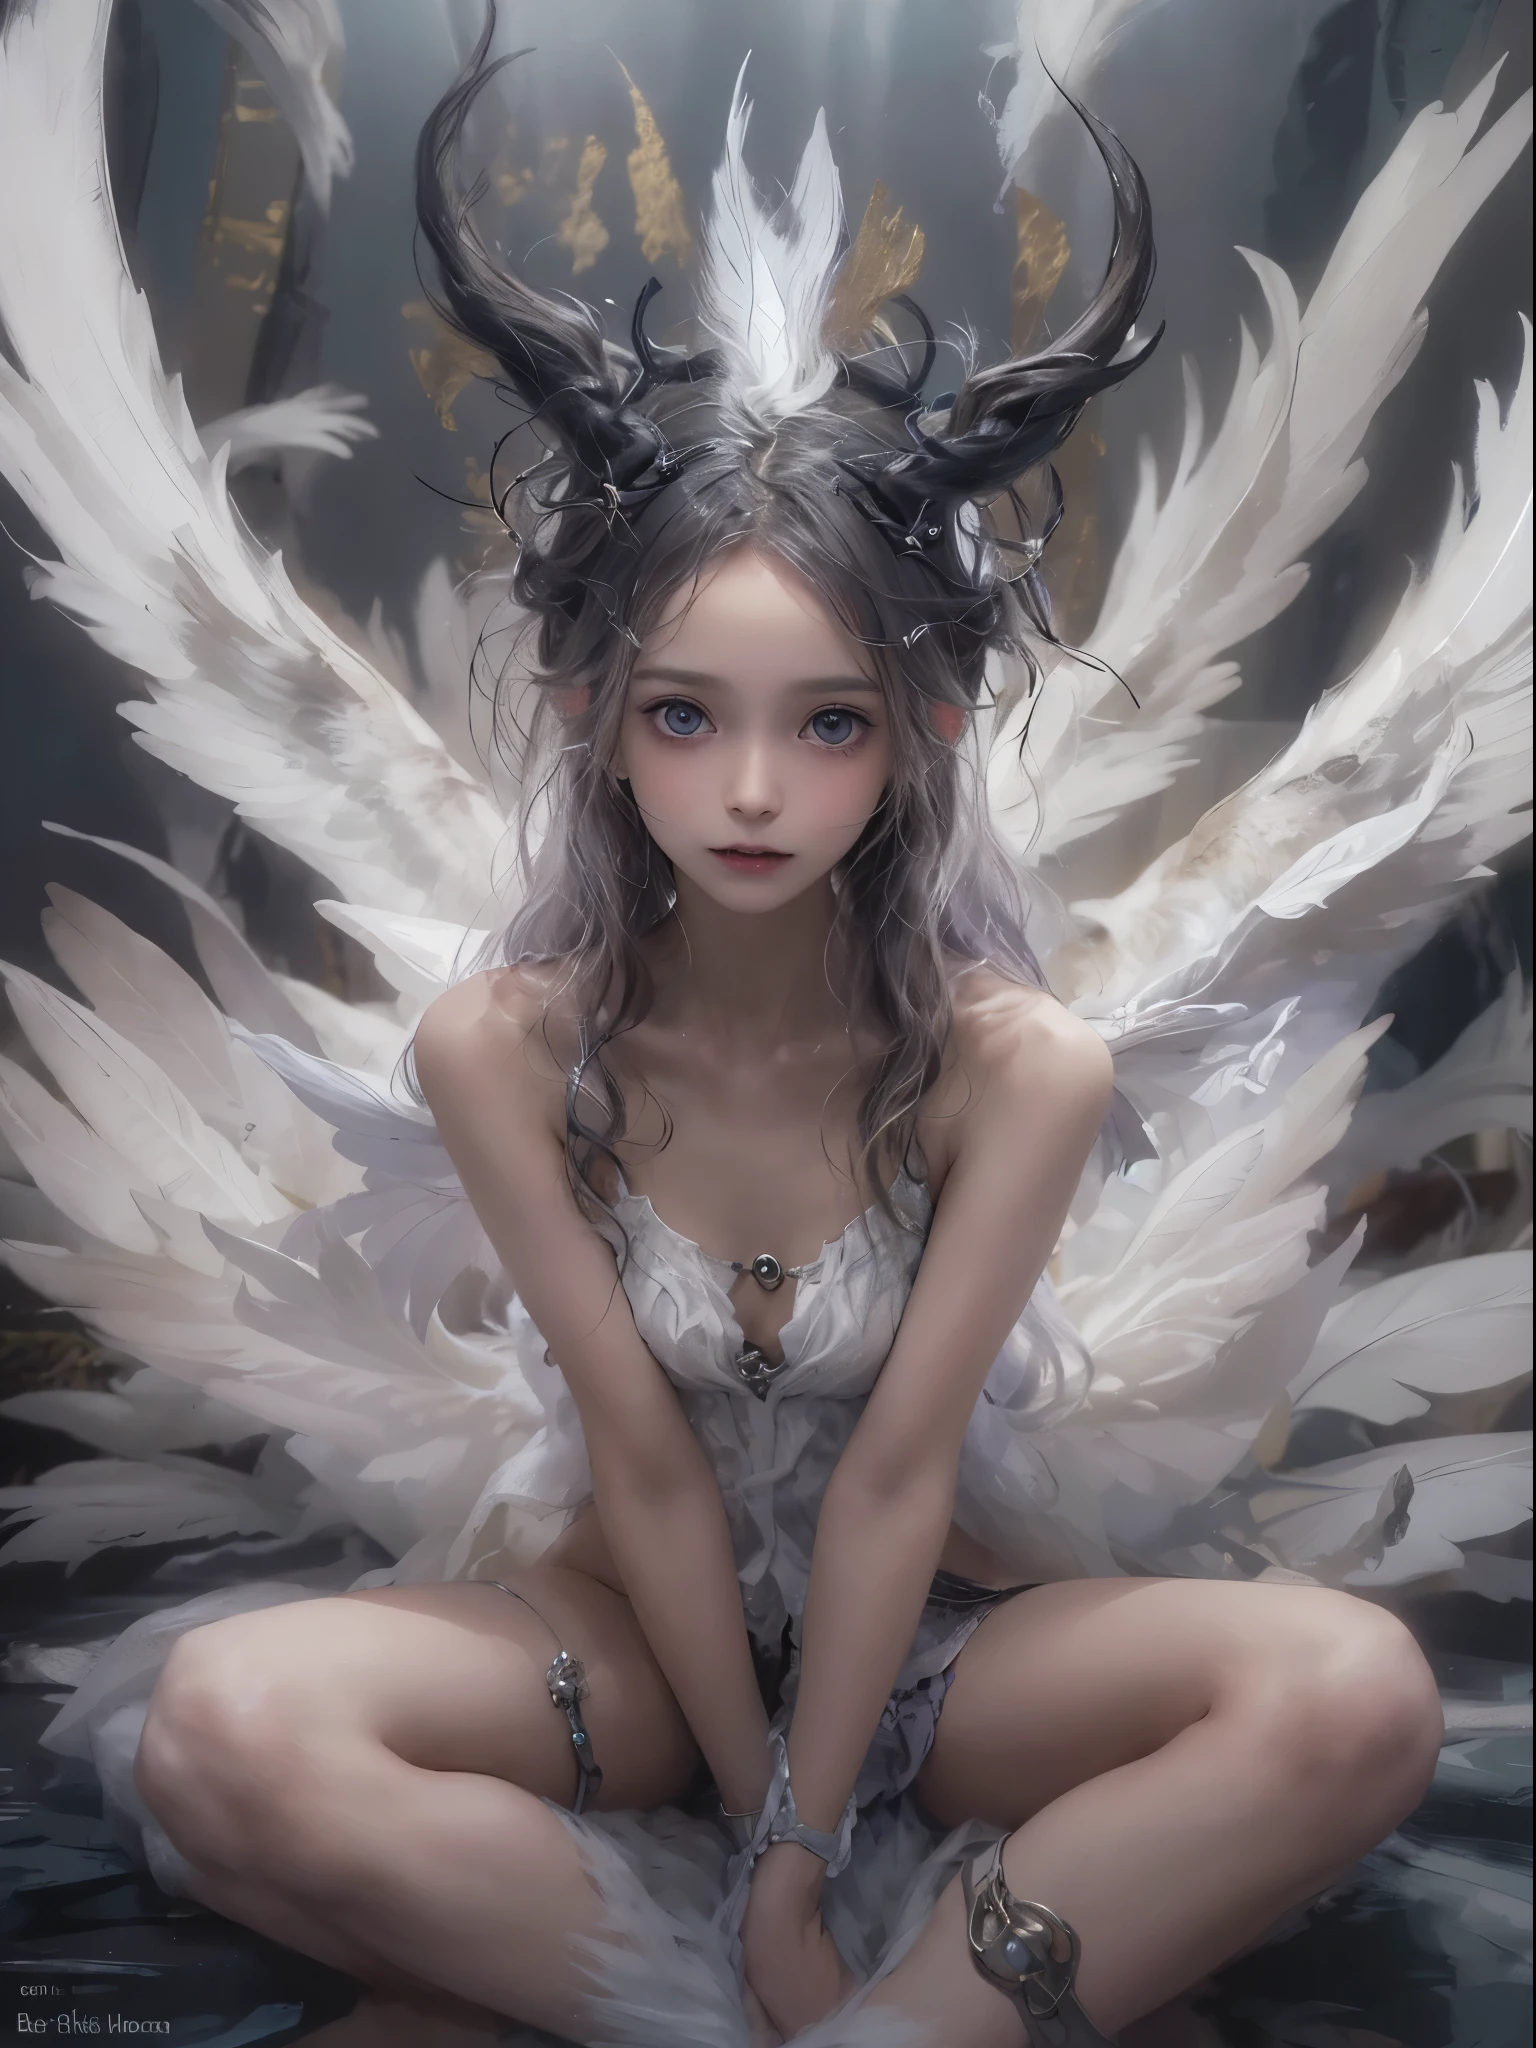 (white color concept:1.0),a girl like doll with angel wings, 12yo, (((twins))),archdevil, nearly naked, thin body, skinny, small breasts, flat chest, (dynamic pose:1.2), thin body, tiny , (((sitting))), devil crown, dragon horn, looking down at camera(Highest quality authentic textured skin),(Fine, Round, Symmetrical eyes),Delicate facial features,(Burning bright and cold eyes), very slim and thin body, naked, nude, (She has a mischievous sadness on her face),metal earrings on the ears,A messy painting，(Hair flows in air:1.5),,(Surrounded by black feathers),Epic realism,Cinematic feeling,(high-density imaging review:1.5),Ultra detailed,Dramaticlight,(intricately details:1.1), complex background, fractal background,(fangs:1.2),smile